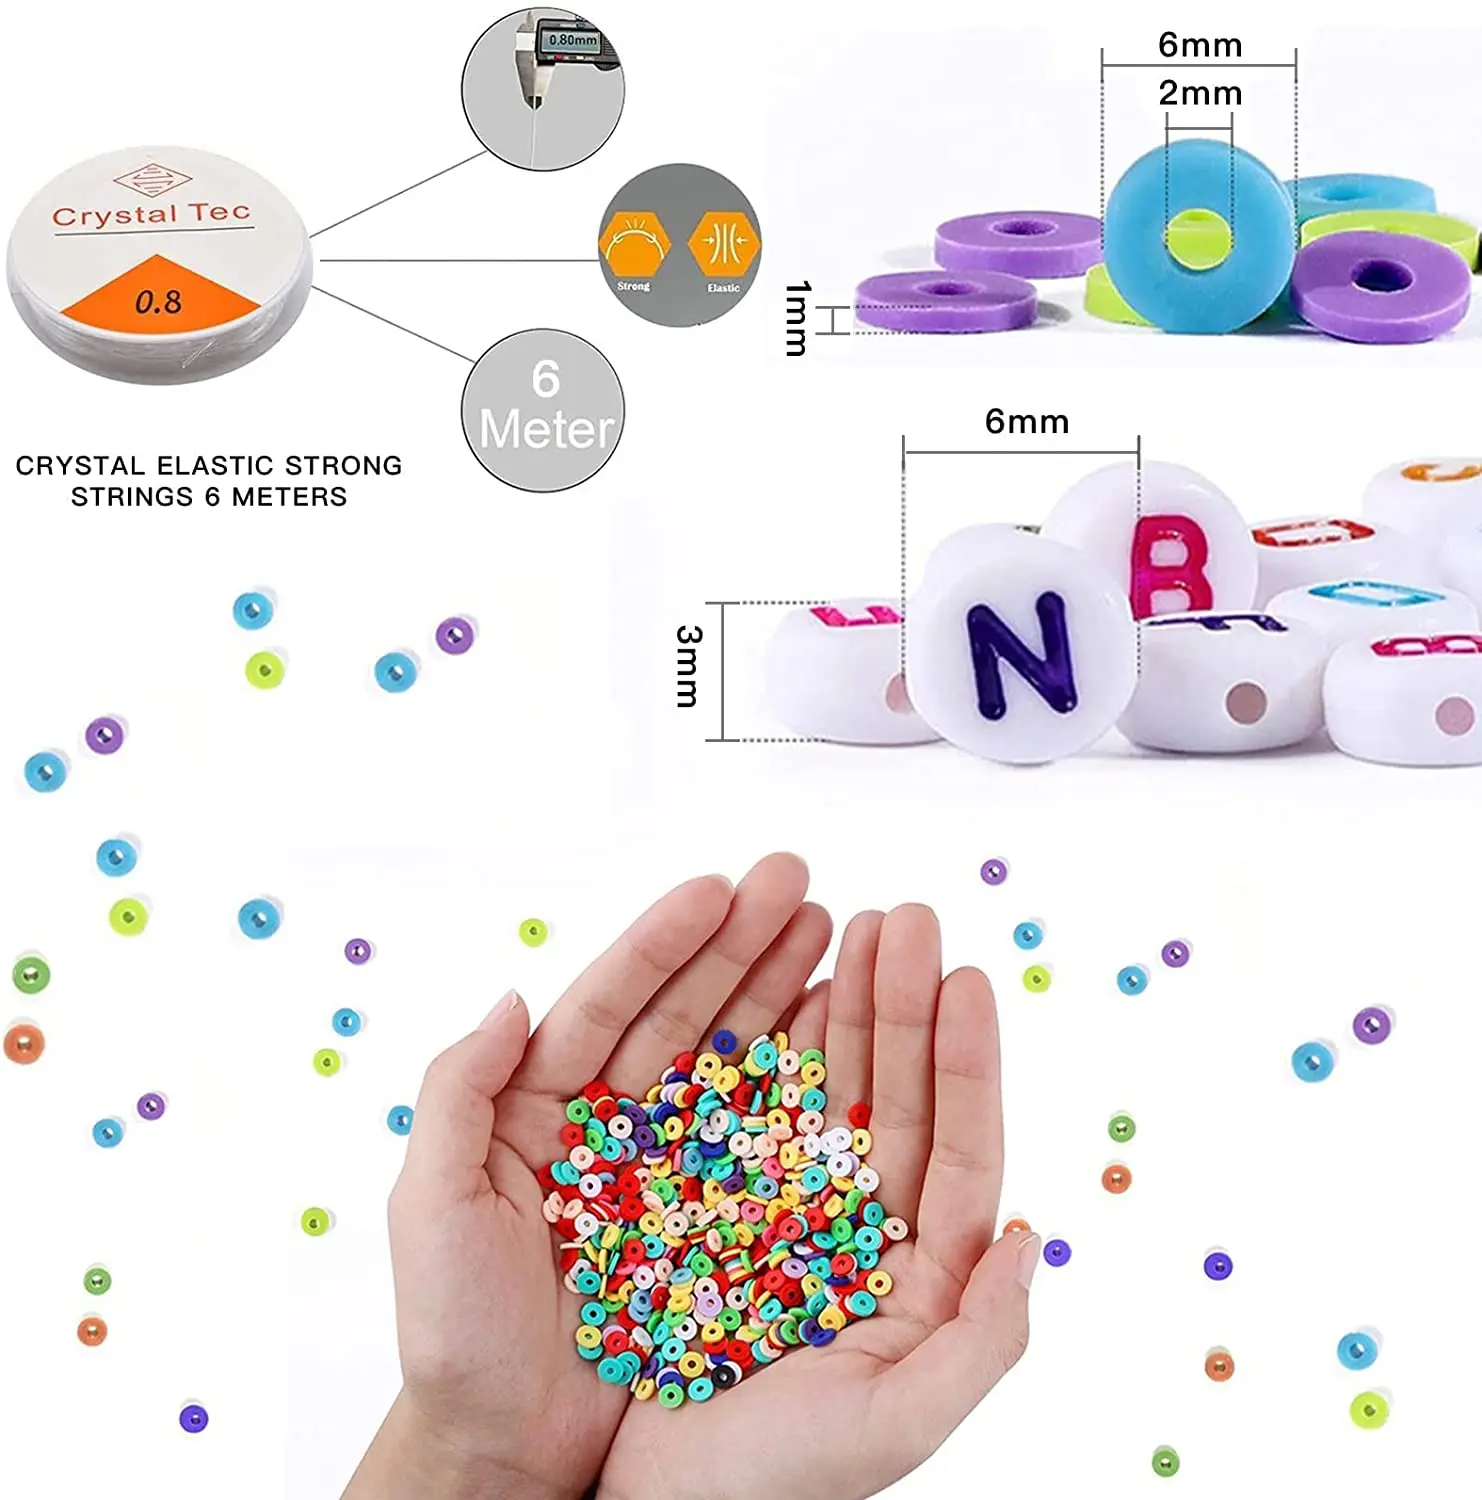 BeadsOEM Smiley Face For Jewelry Making 24 Colors 6mm Flat Polymer Heishi With Pendants Clay Bead Letter Bead Kit Diy